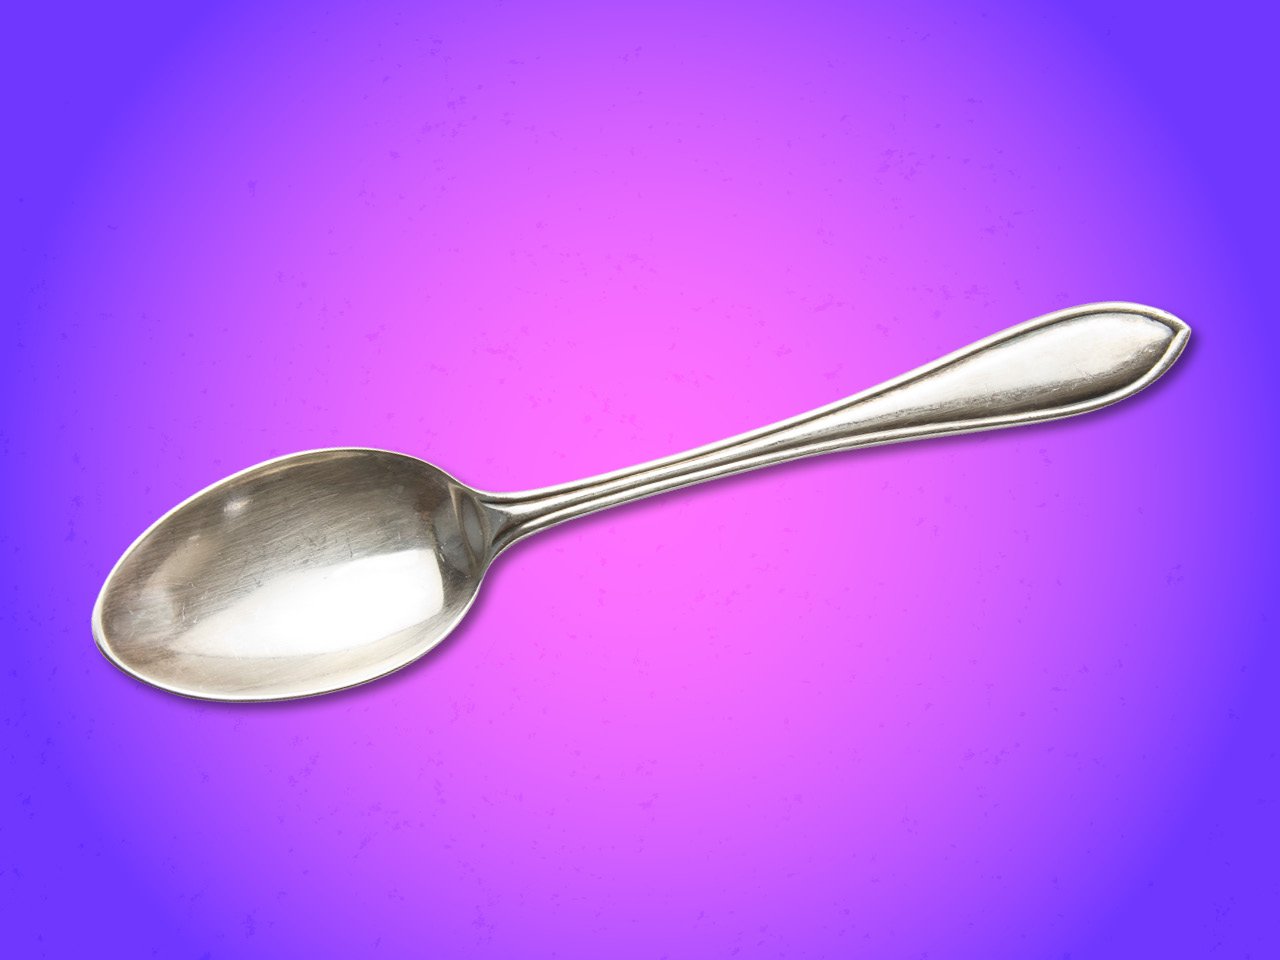 8 Reasons Why The Humble Spoon Is The Ultimate Kitchen Multitasker.